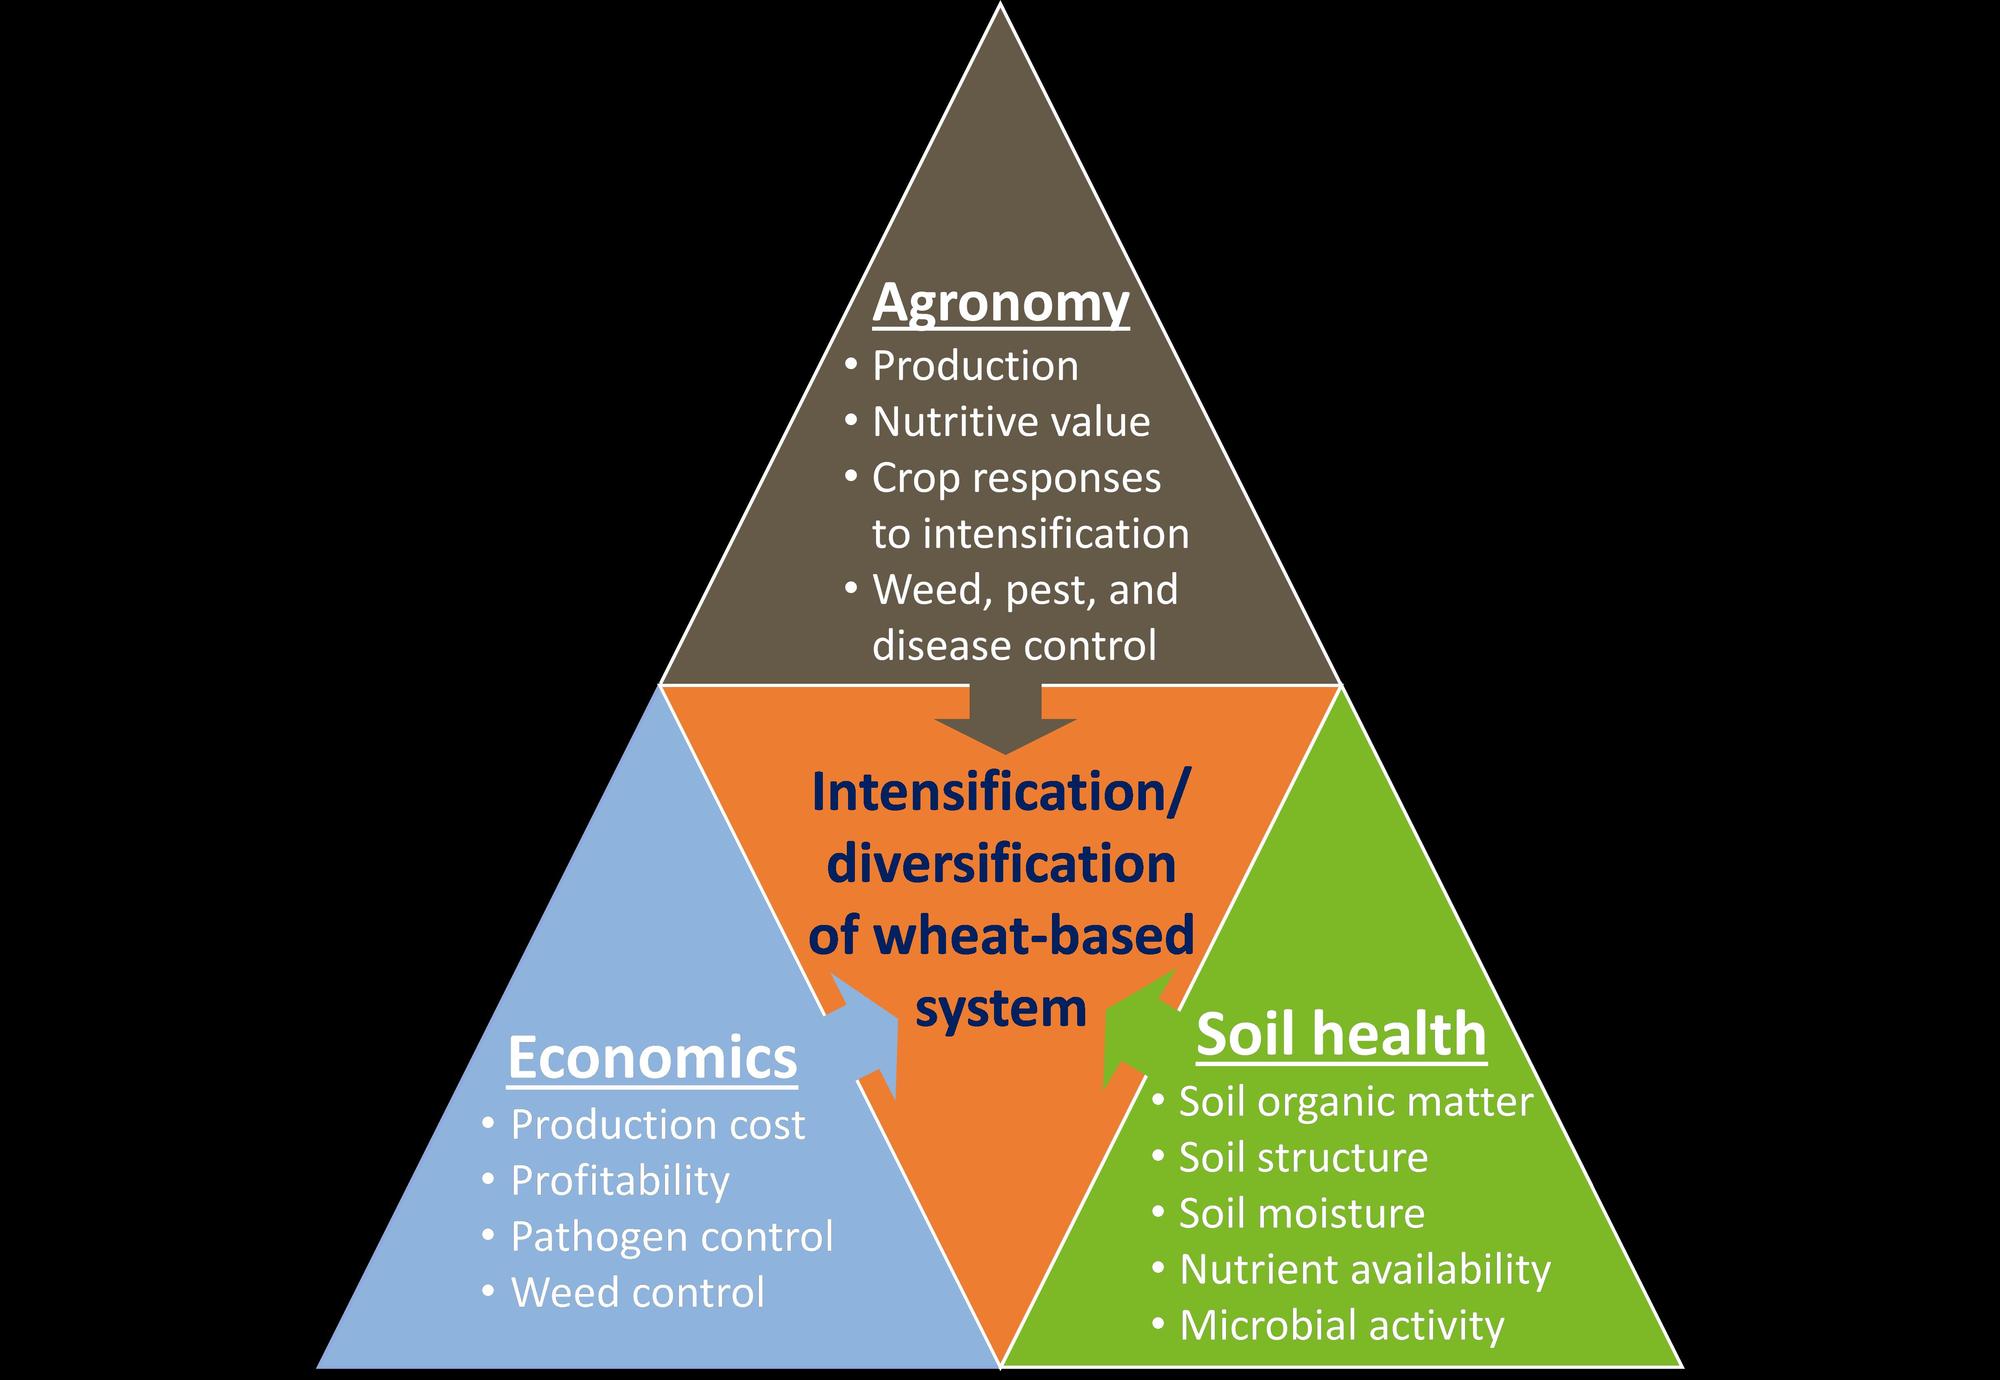 Agronomy: production, nurtritive value, crop responses to intensification, weed, pest and disease control; Economics: production cost, profitability, pathogen control, weed control; Soil health: organic matter, structure, moisture, nutrients, microbial